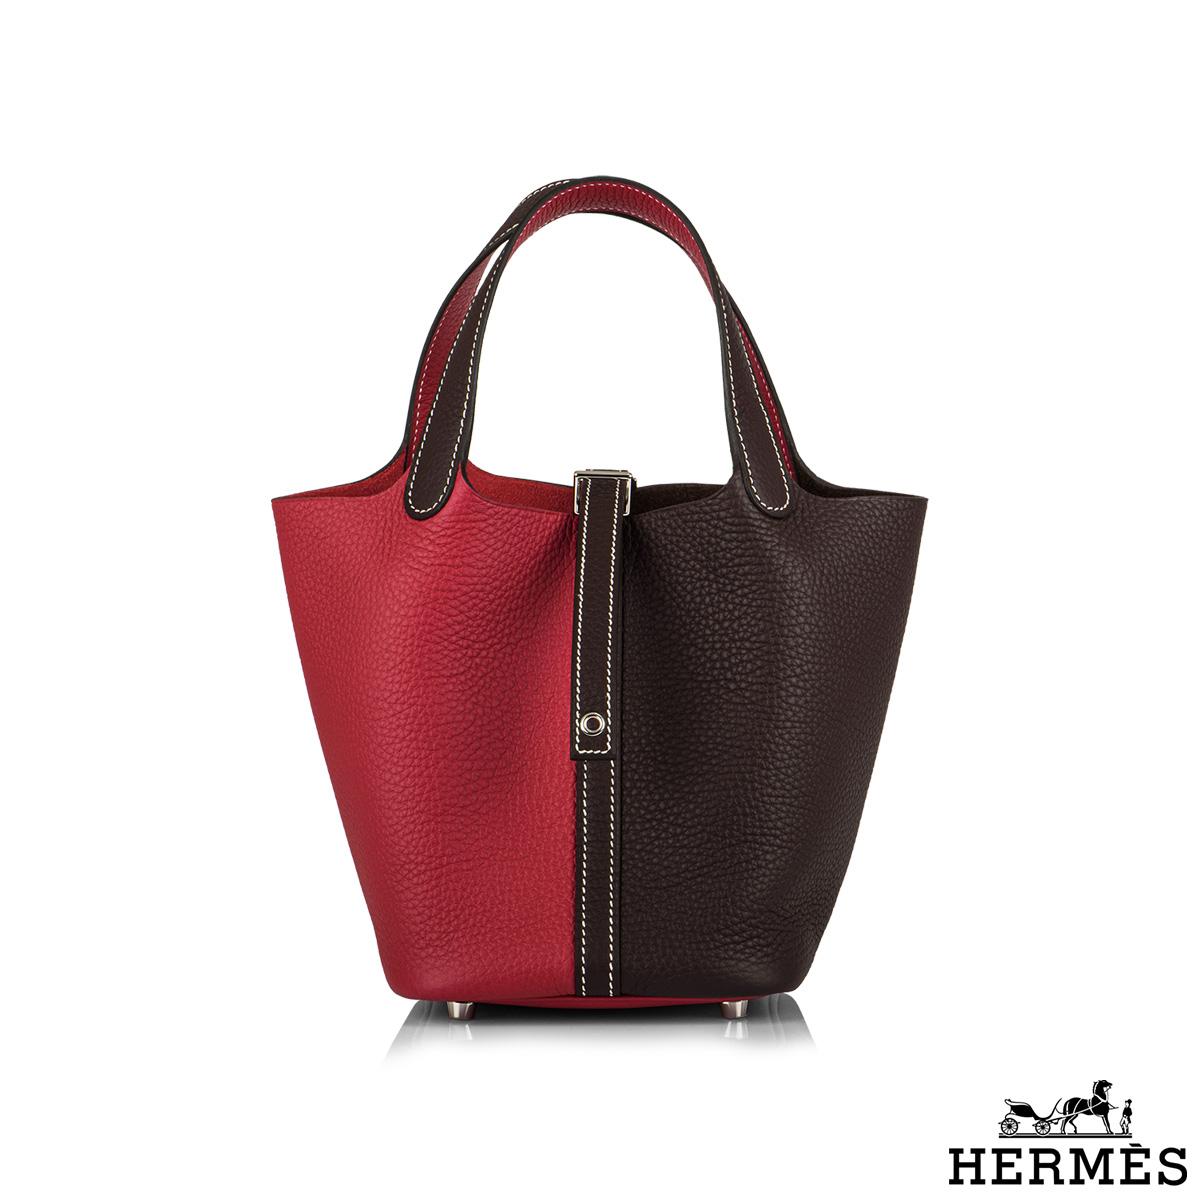 A Chic and minimalist Hermes Picotin Lock 18. With a design inspired by horse troughs, the Picotin is one of the classic and timeless Hermes bags. The exterior of this pictotin 18 is in colour Rose Mexico and Plume clemance leather. The interior